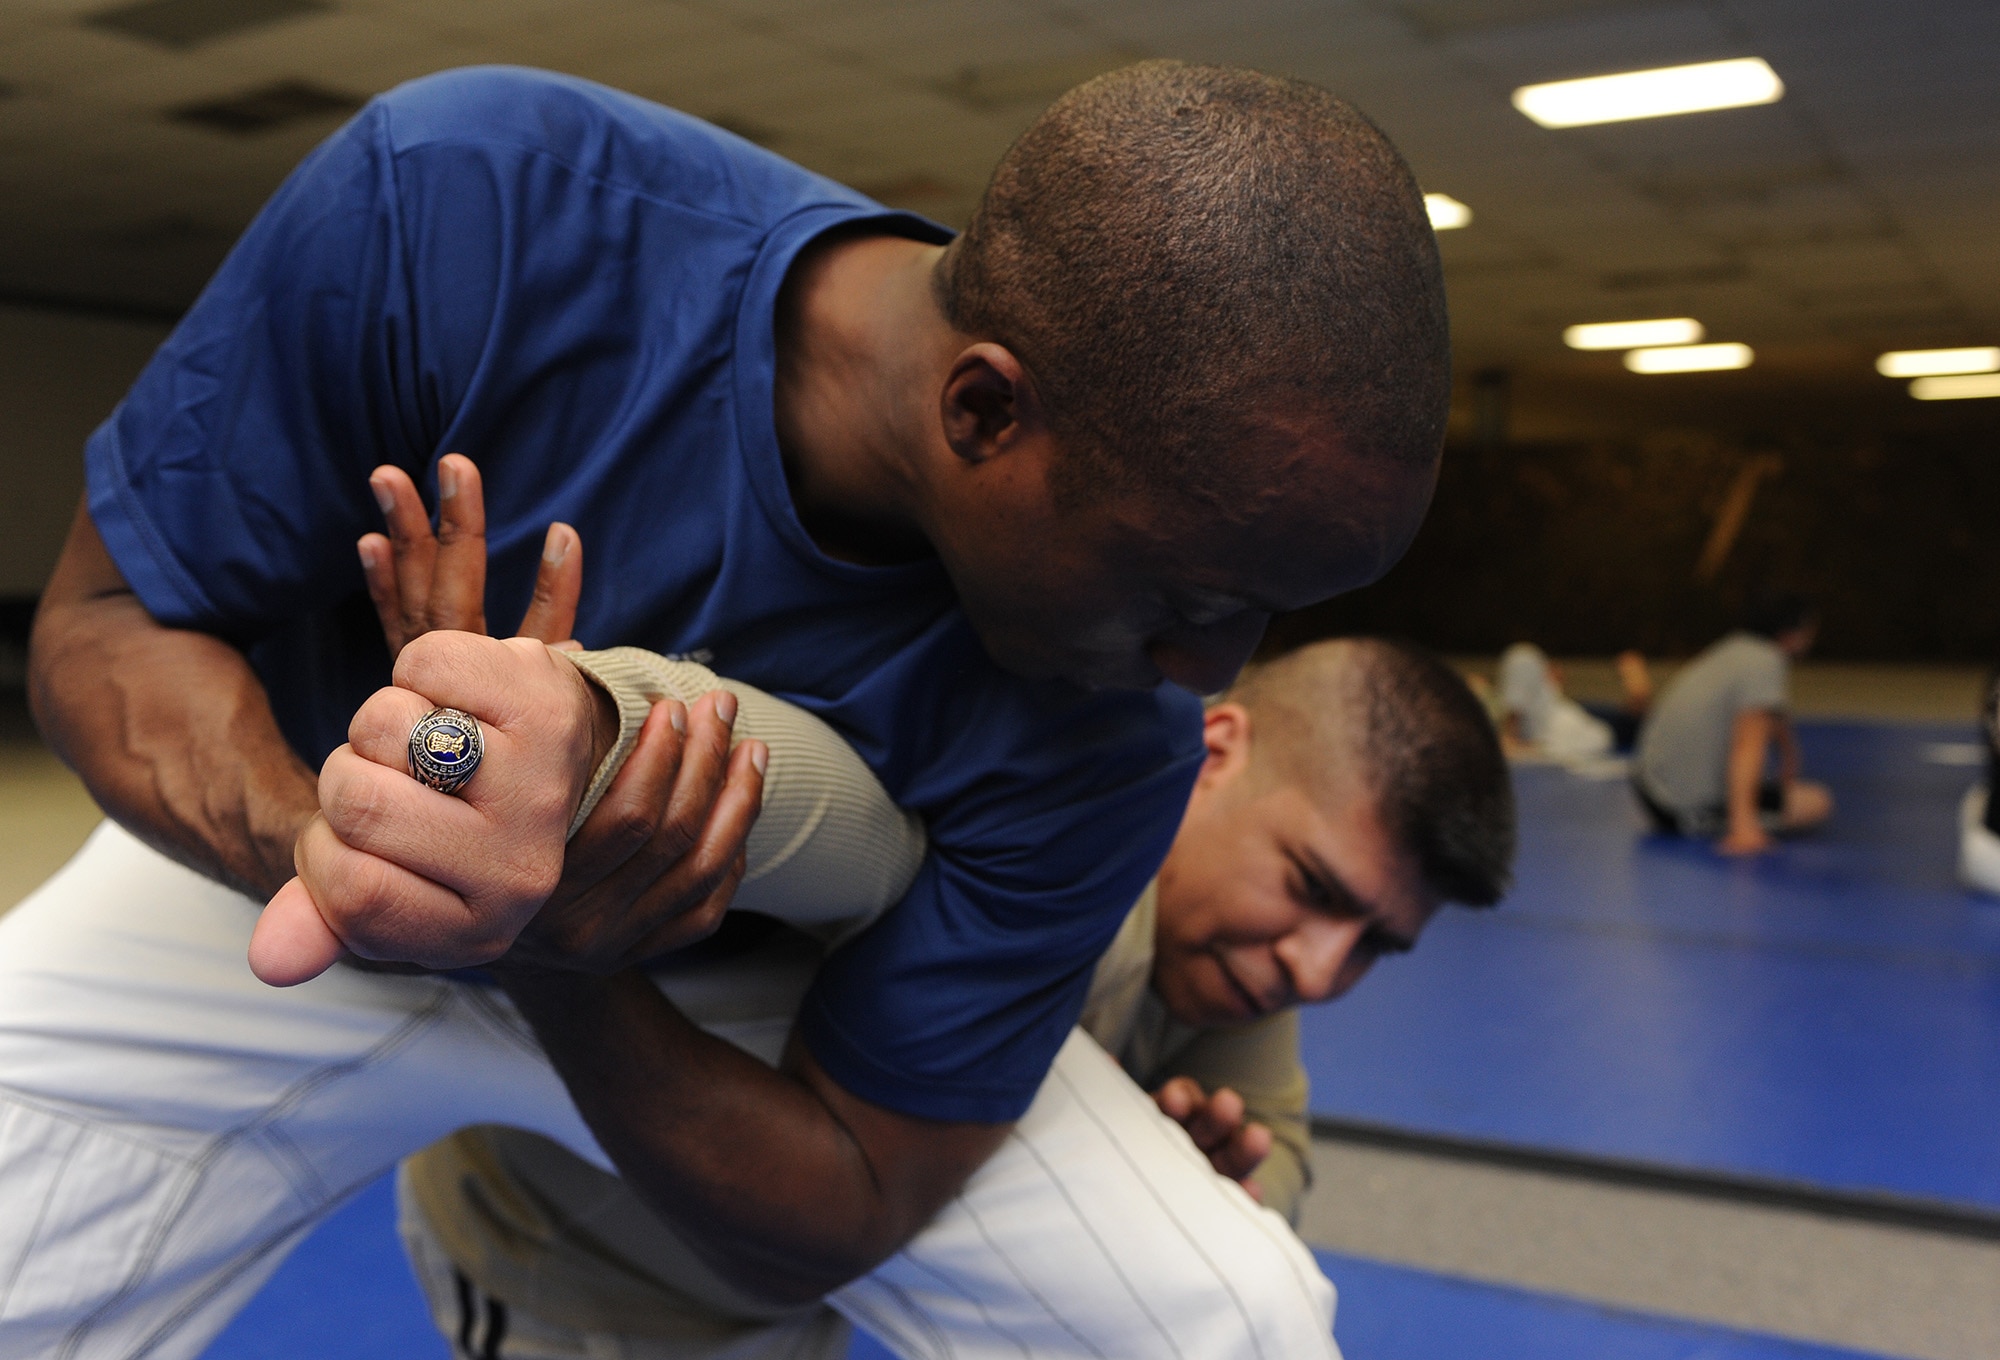 Maj. Tyrone Bess, 5th Security Forces Squadron deputy commander, applies a standing arm lock to Tech. Sgt. Tony Cortinas, 5th Bomb Wing director of equal opportunity, during Jiu Jitsu training at Minot Air Force Base, N.D., Oct. 22. Bess has been instructing for more than five years with no plans of stopping in the near future. (U.S. Air Force photo/Senior Airman Stephanie Sauberan)